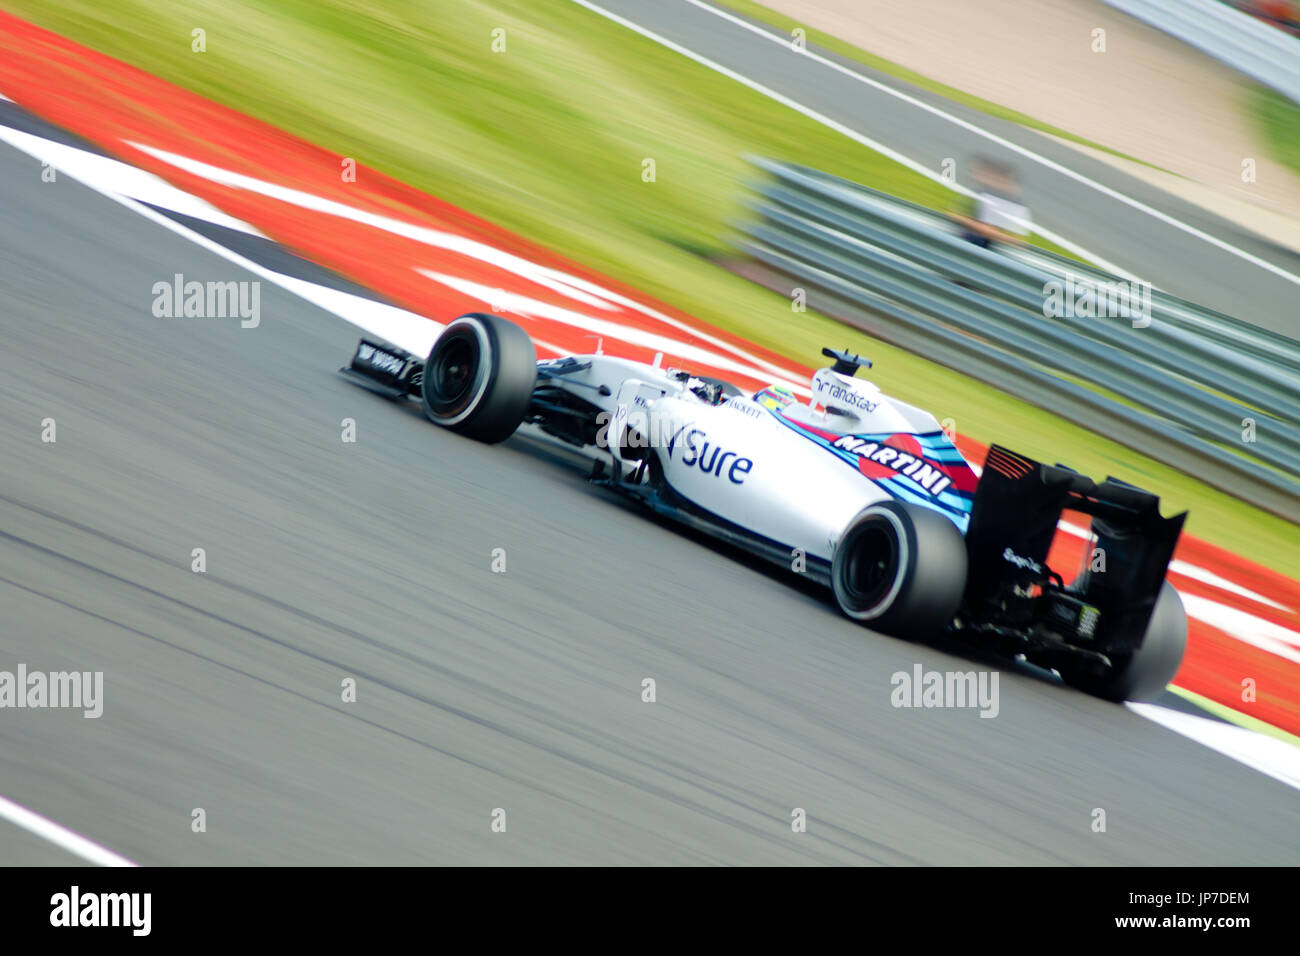 A Wiliams F1 car at the the first corner of the Silverstone Grand Prix circuit during the 2016 British Formula 1 Grand Prix Stock Photo